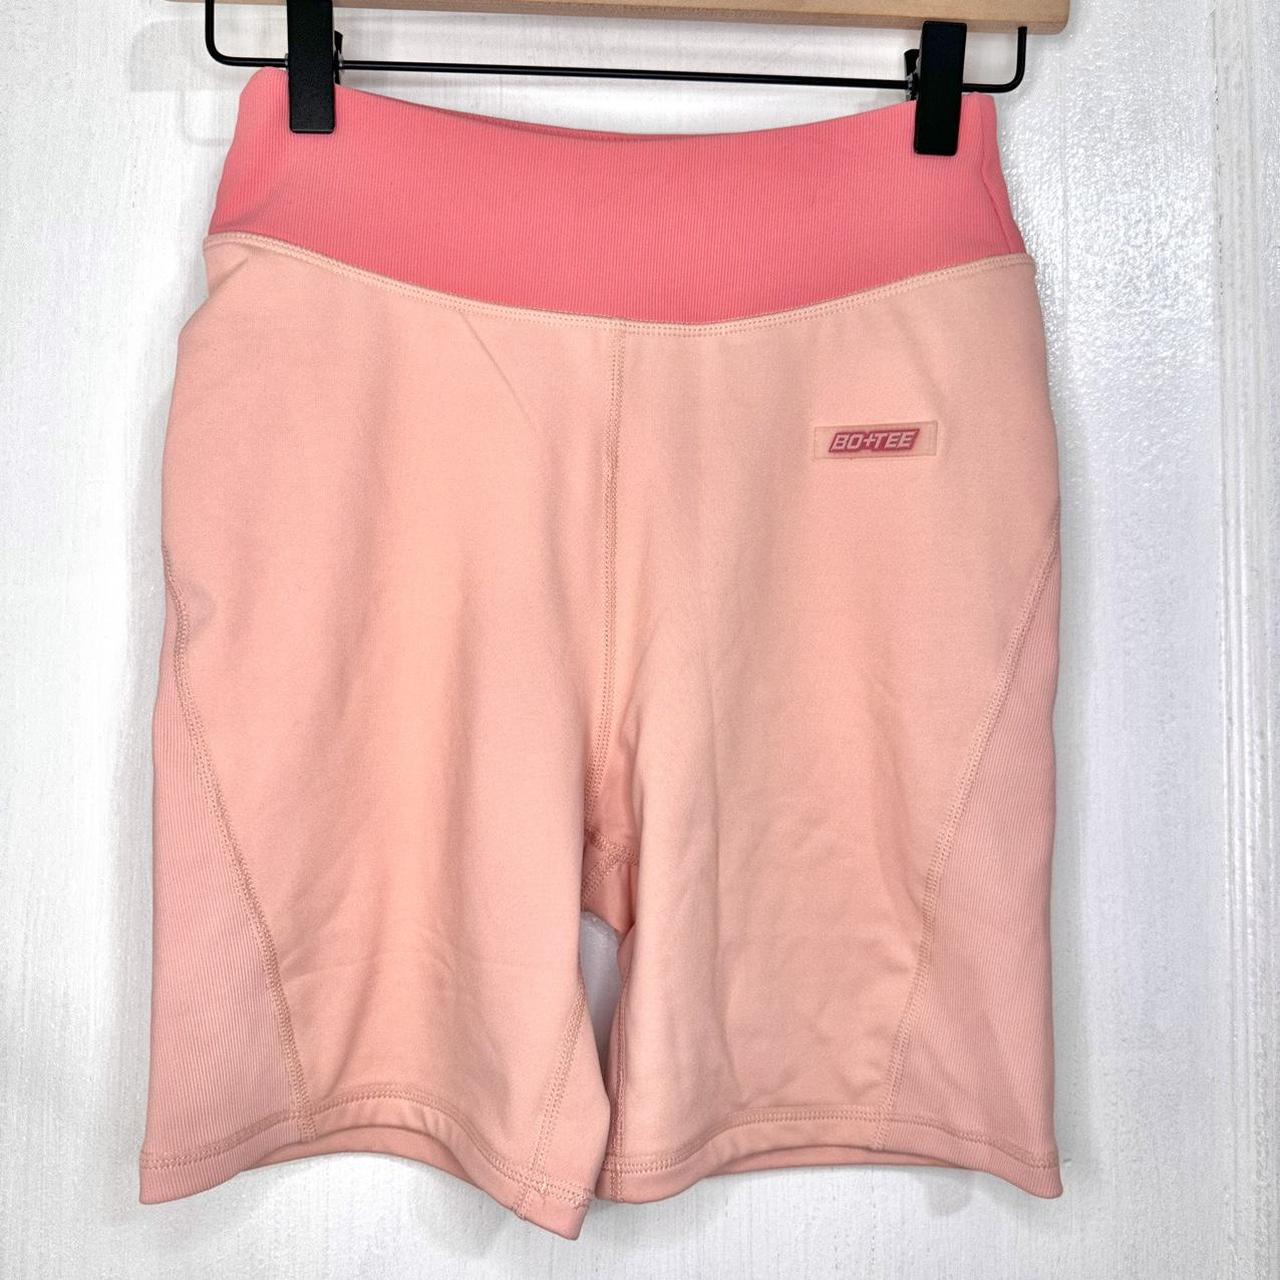 Bo + tee Contrast Waist Cycling Shorts In Pink XS - Depop